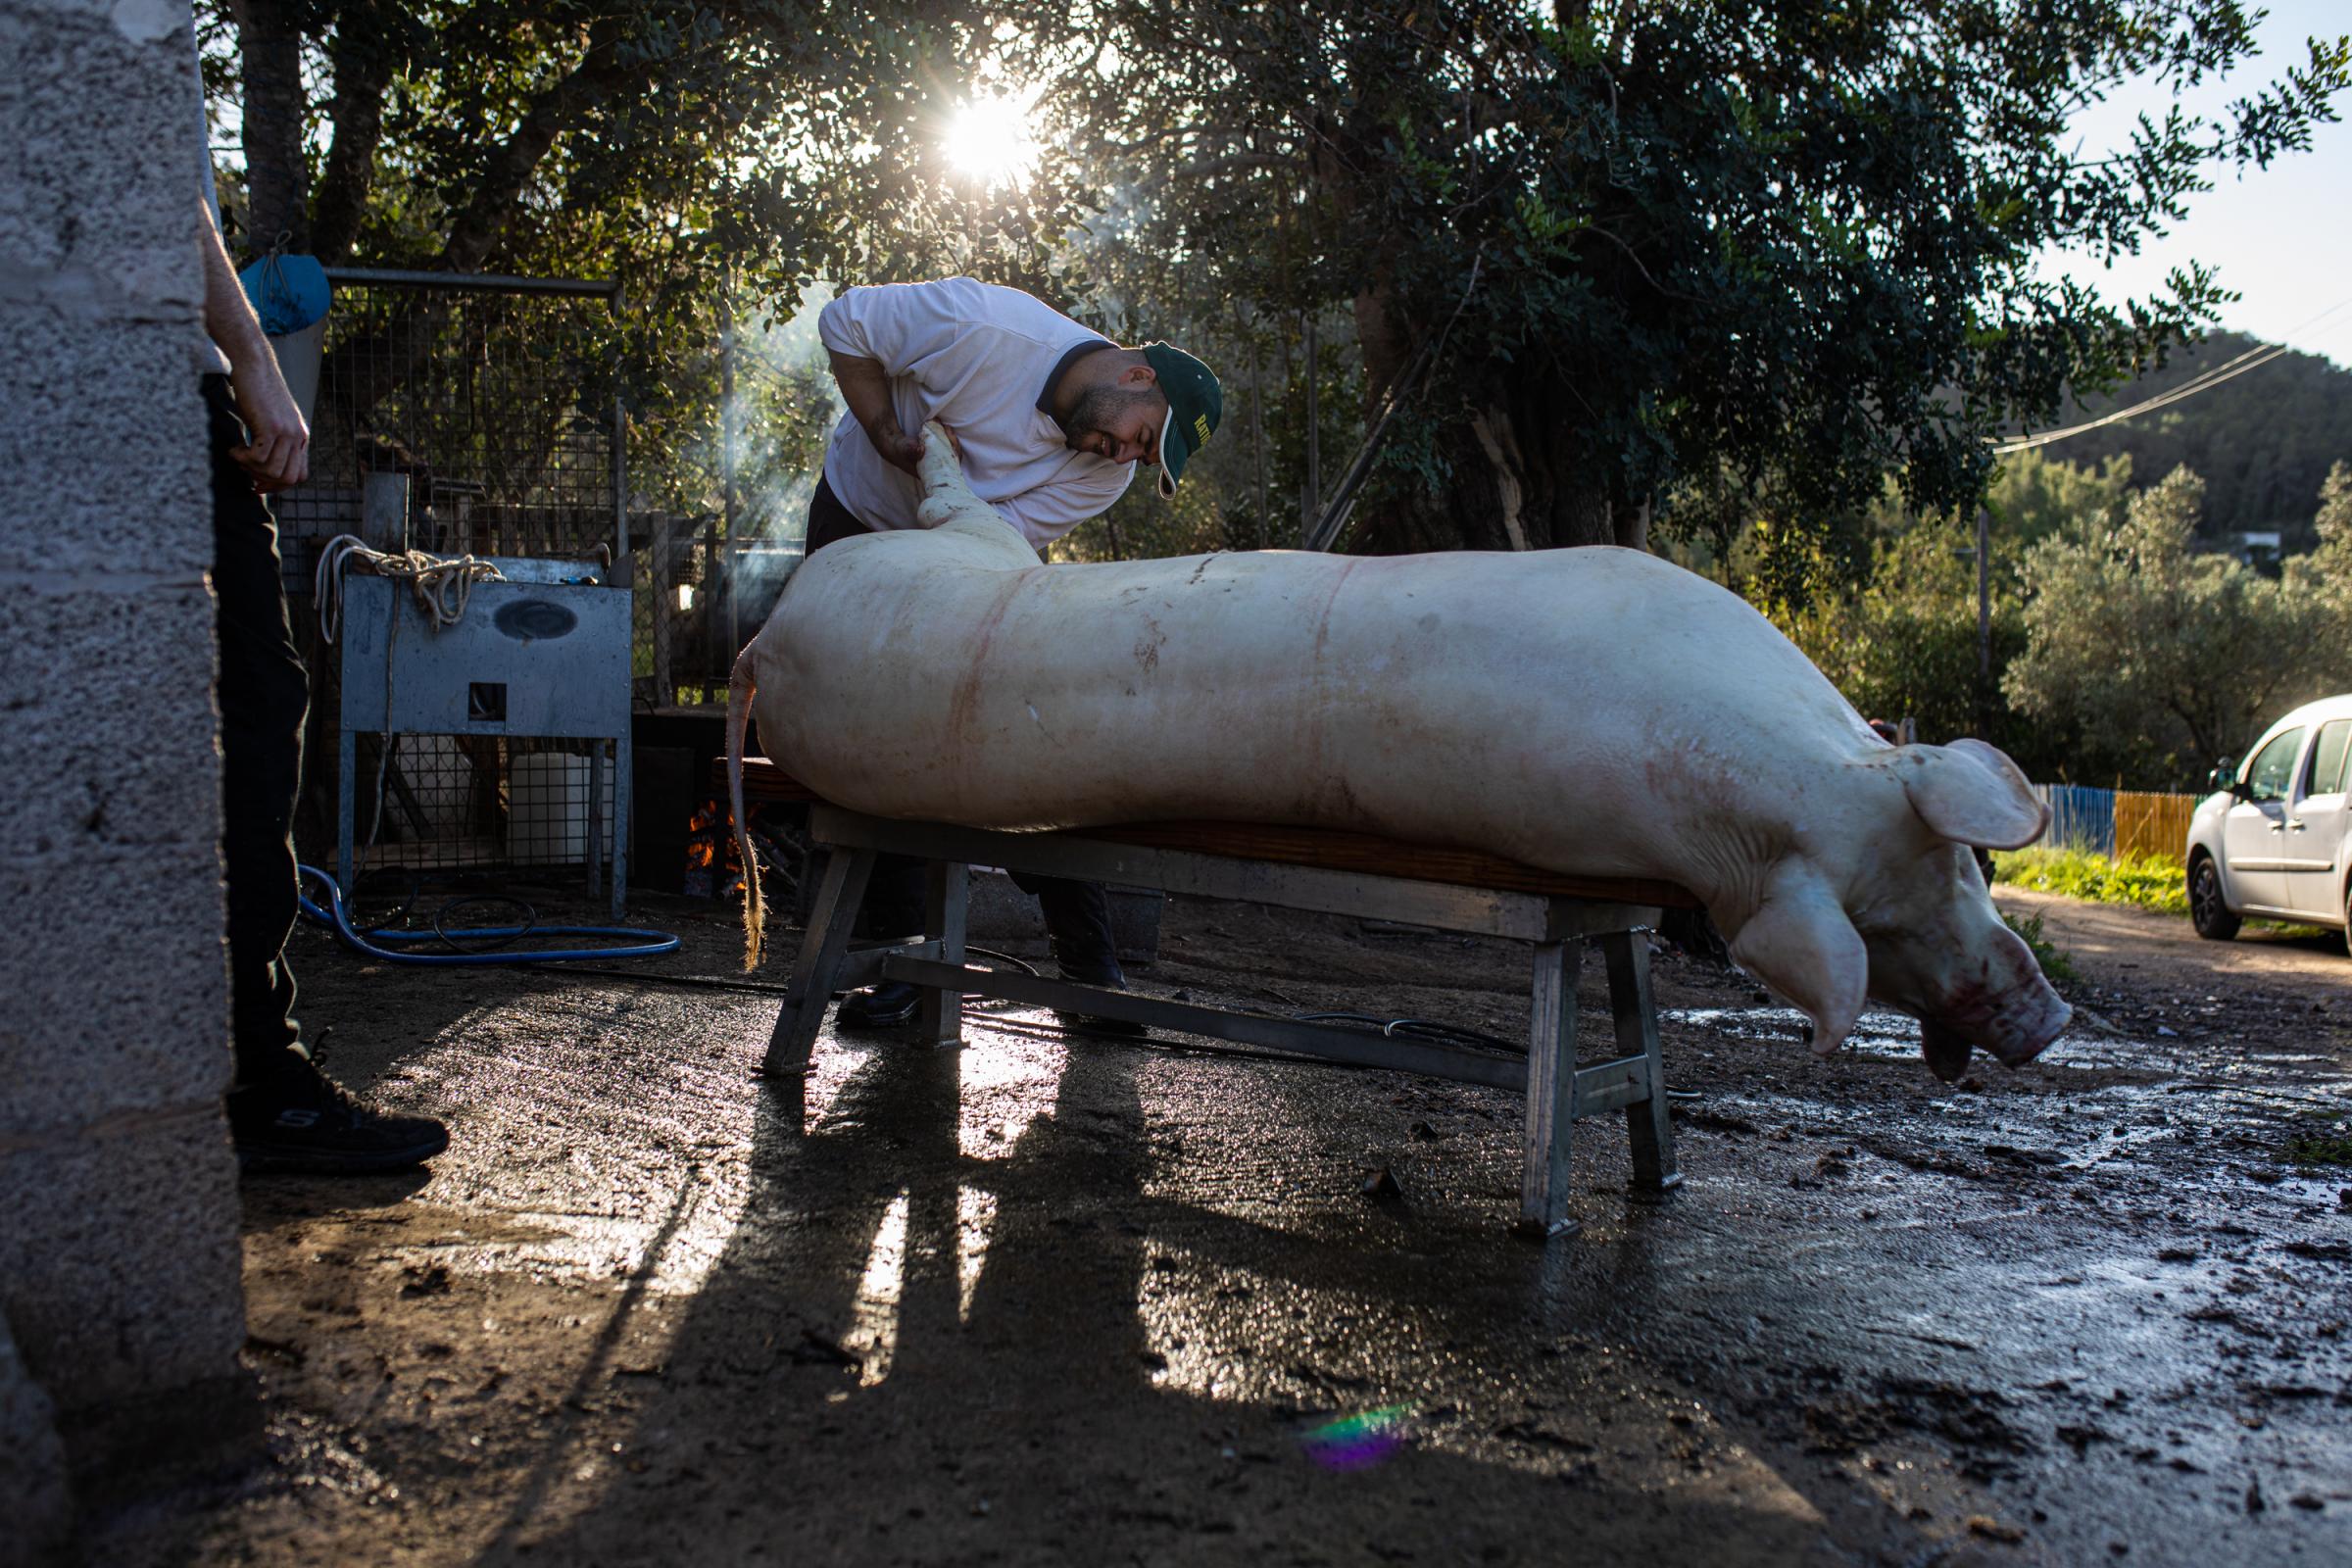 Spain's Sustainable Swine Slaughtering For Prized Iberian  - IBIZA, SPAIN - DECEMBER 06: The pig slaughterer cleans...